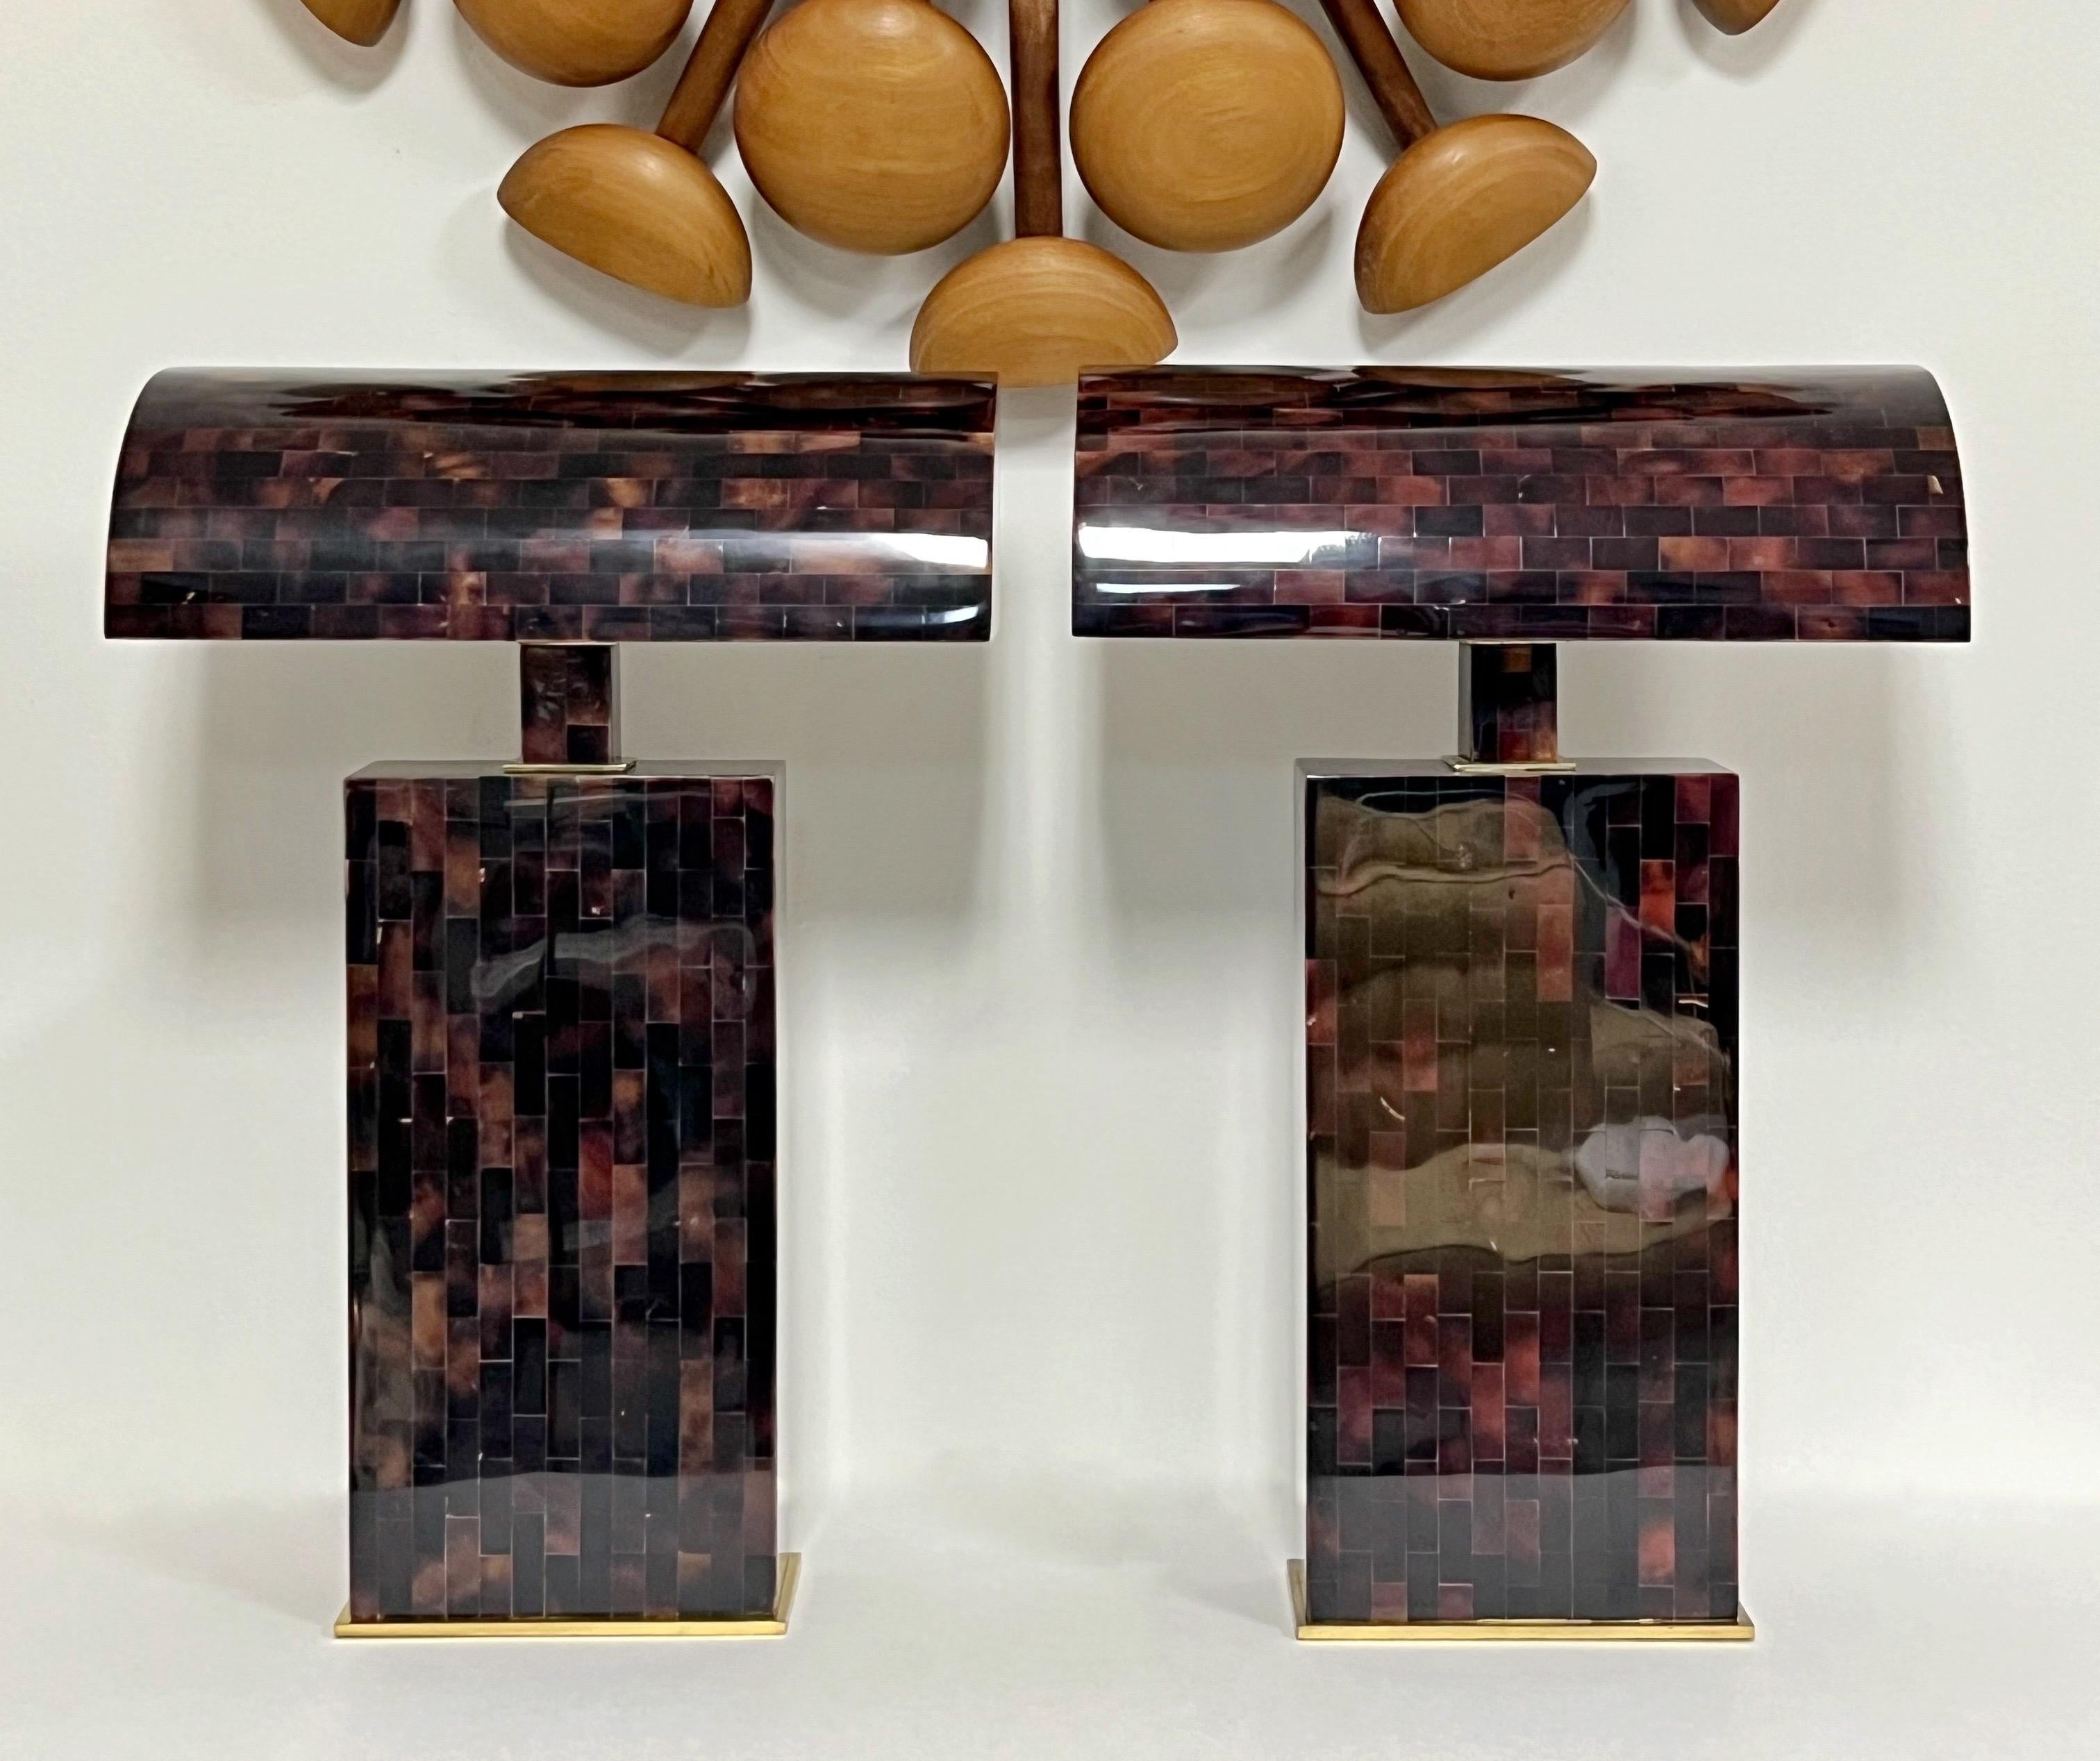 A pair of Karl Springer lamps. Completely done in tessellated penshell rectangles with a glossy polished finish. The look very closely resembles tortoise shell. Brass hardware. Each lamp has 2 regular sockets under the shade.